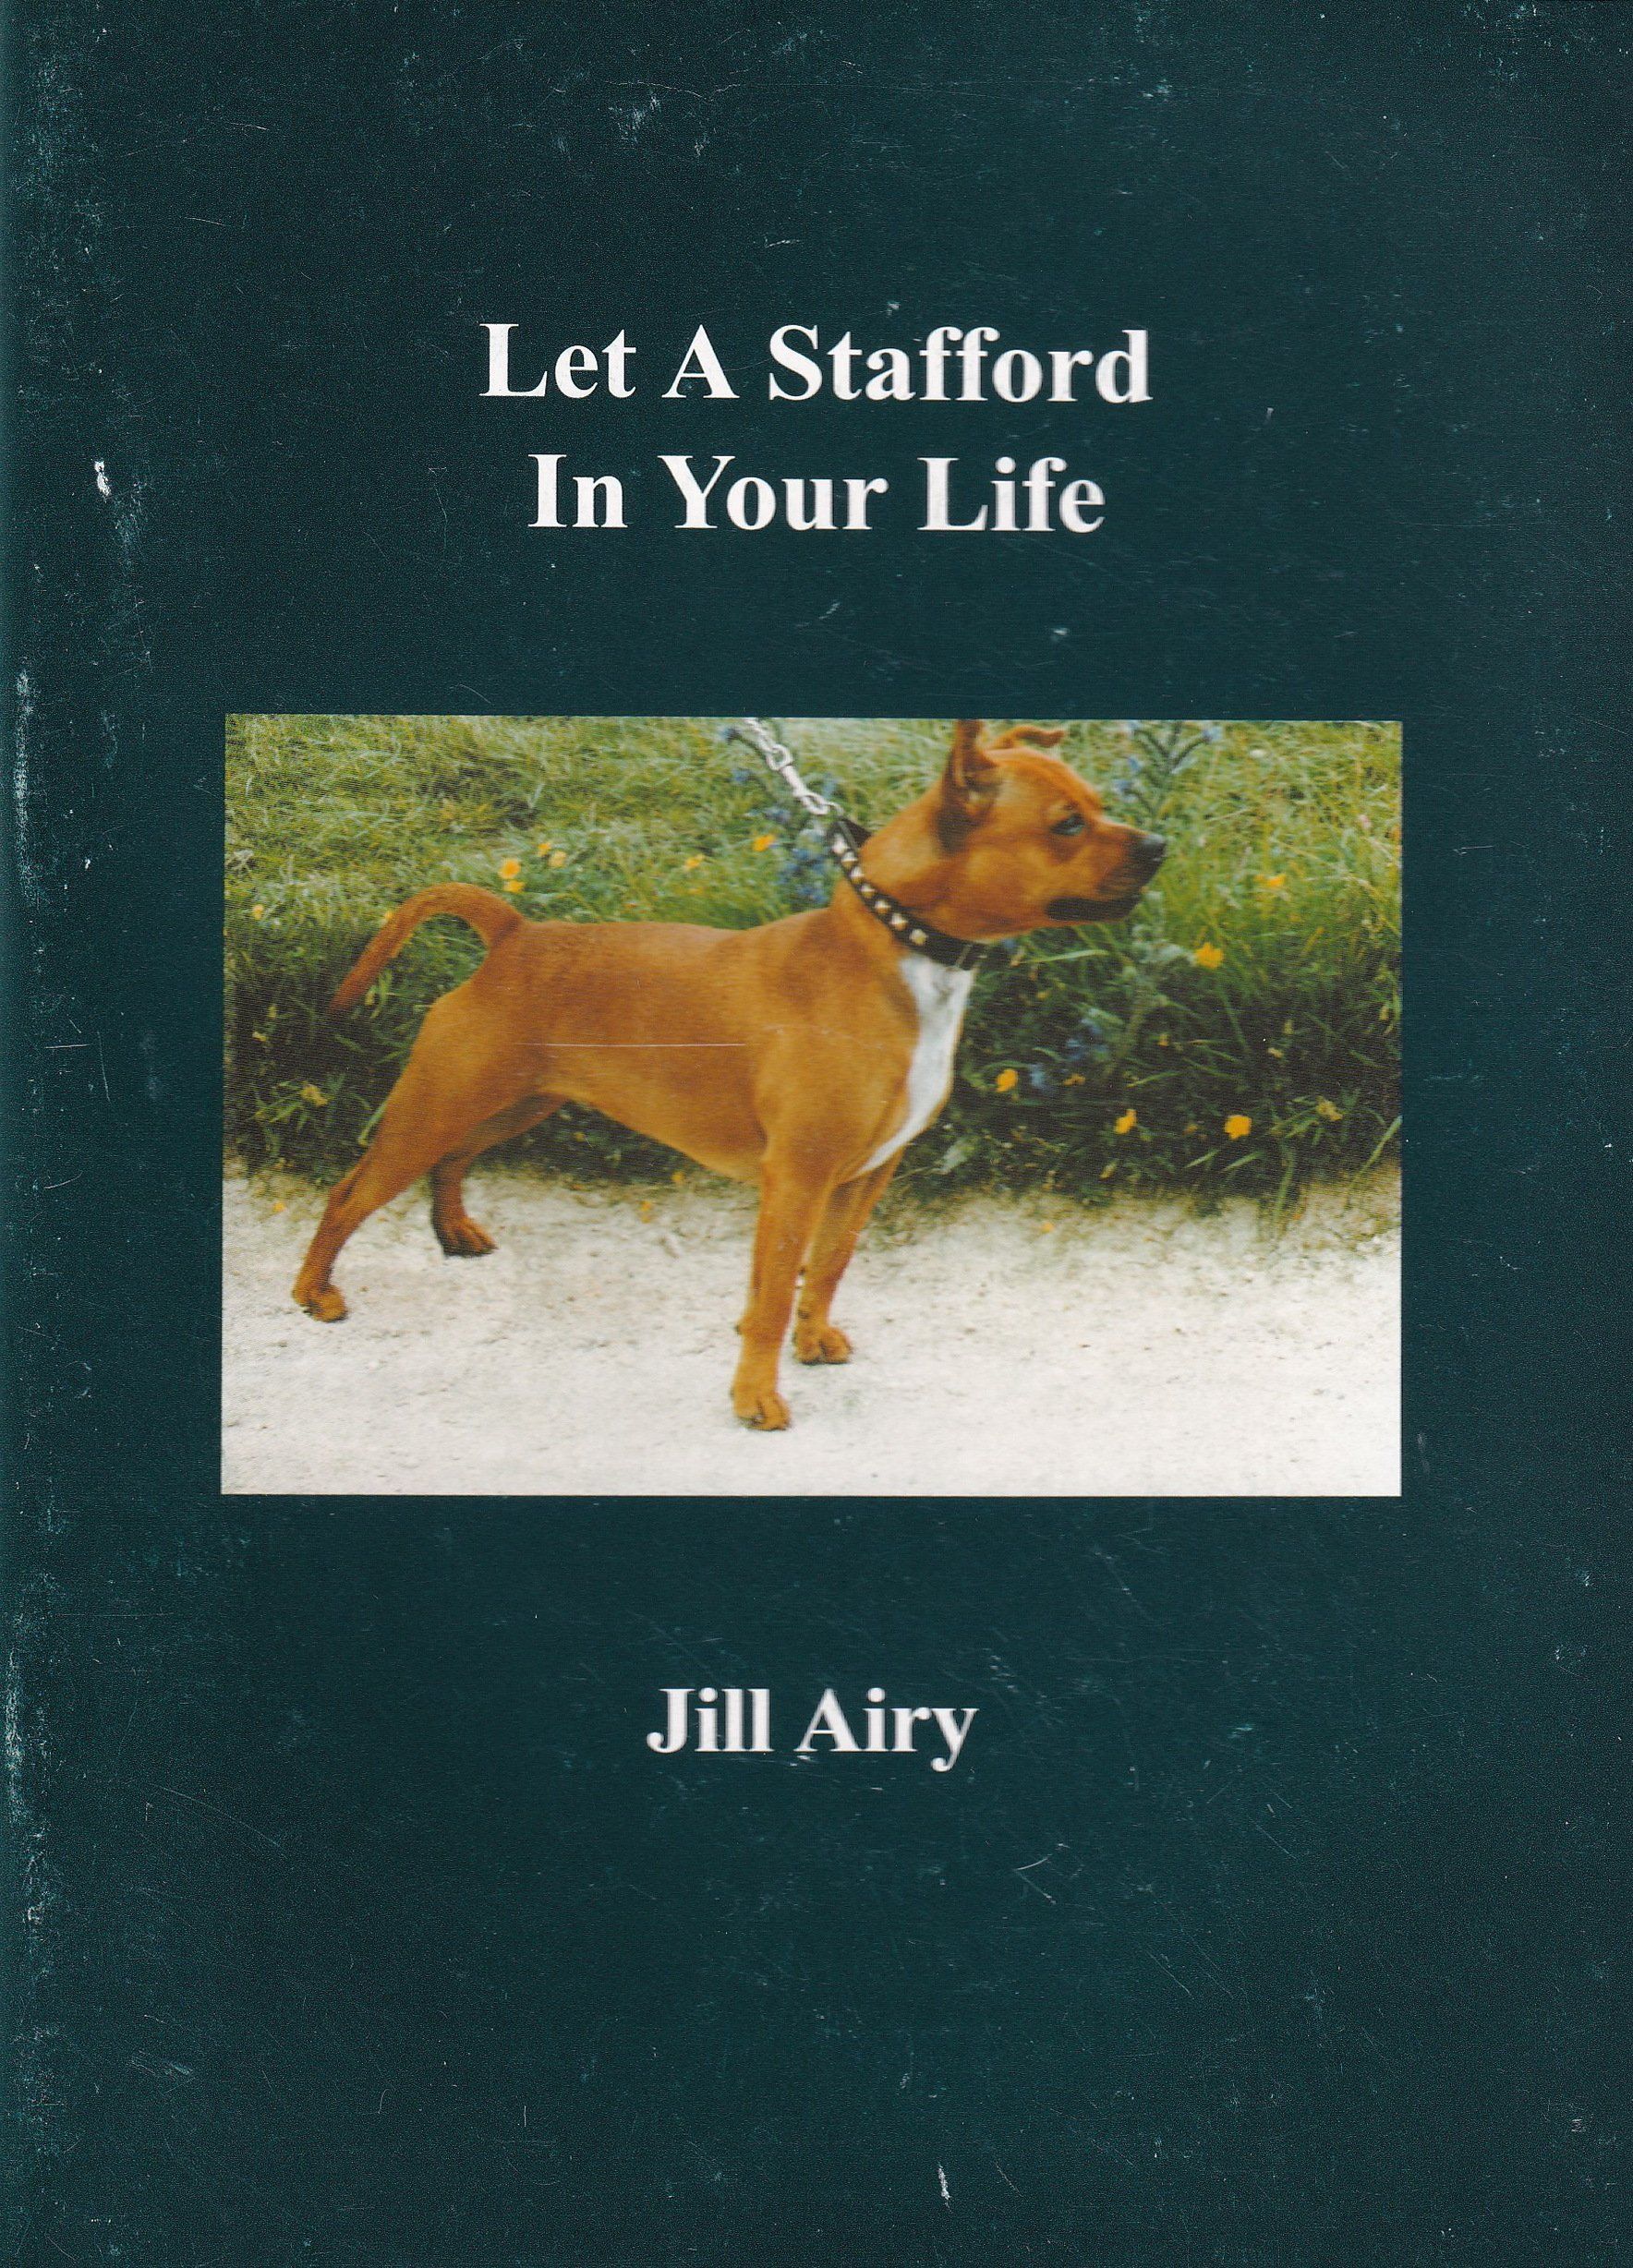 Let A Stafford In Your Life by  Jill Airy